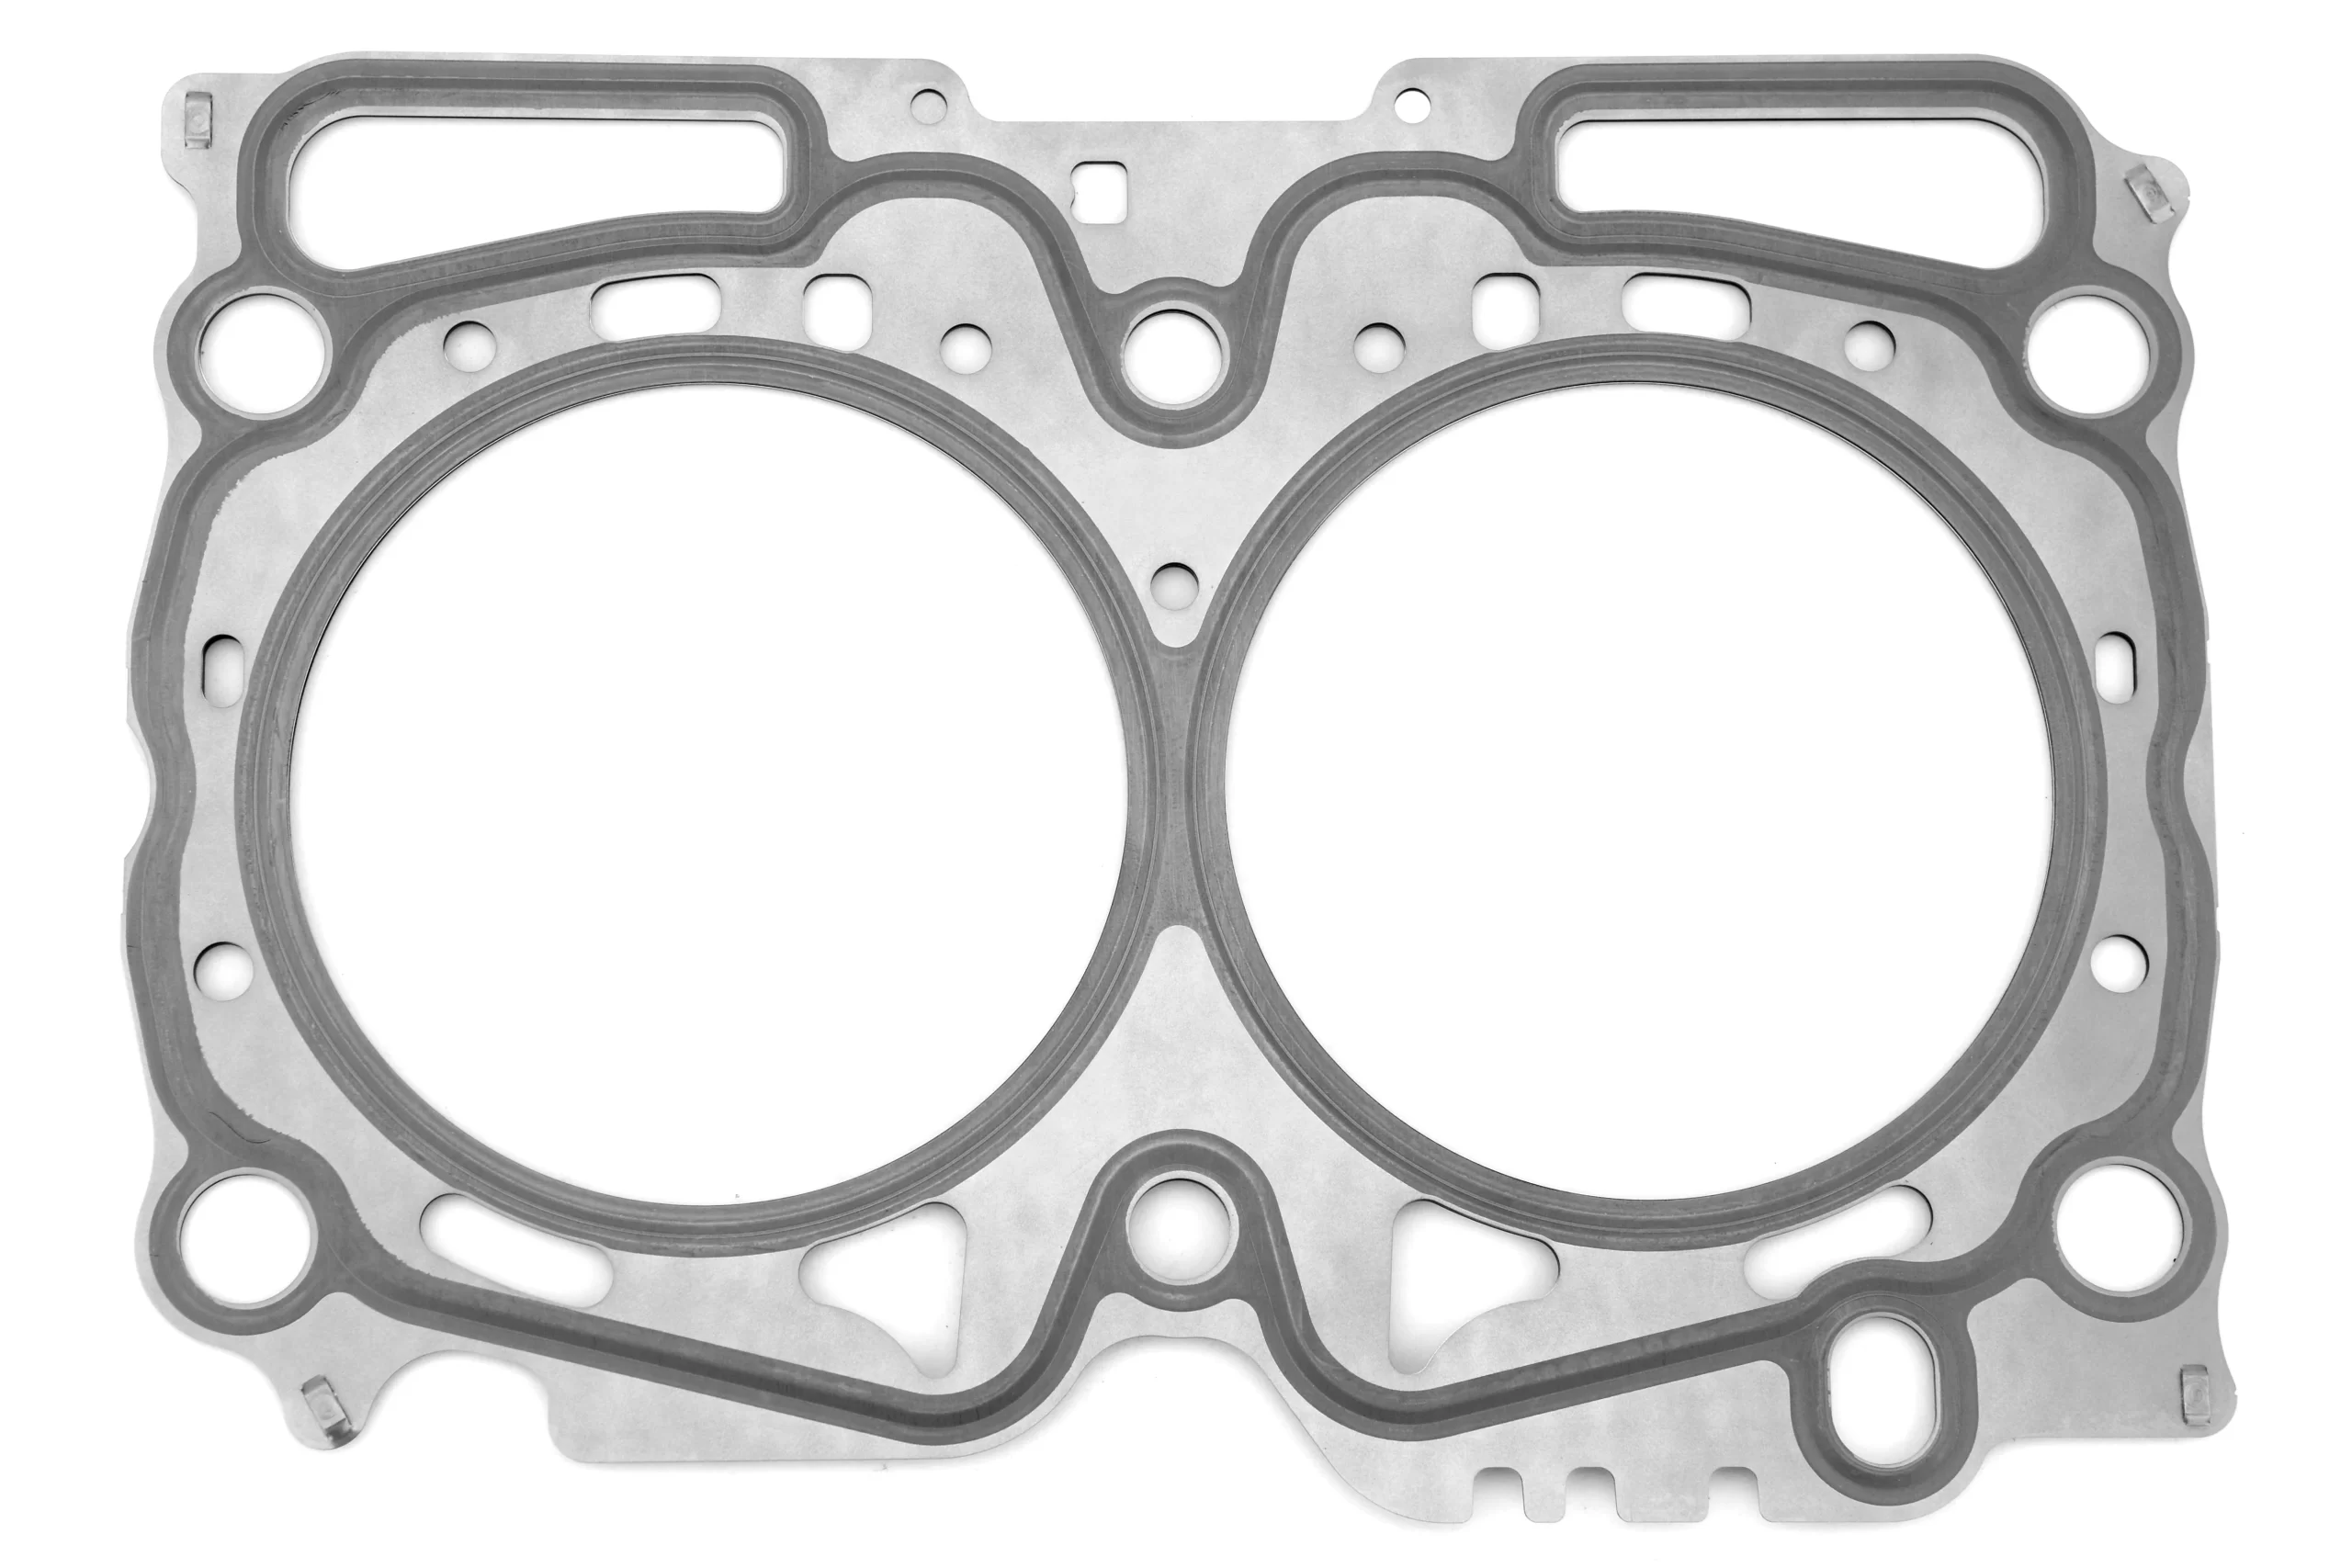 What Are The Main Subaru Head Gasket Problems?